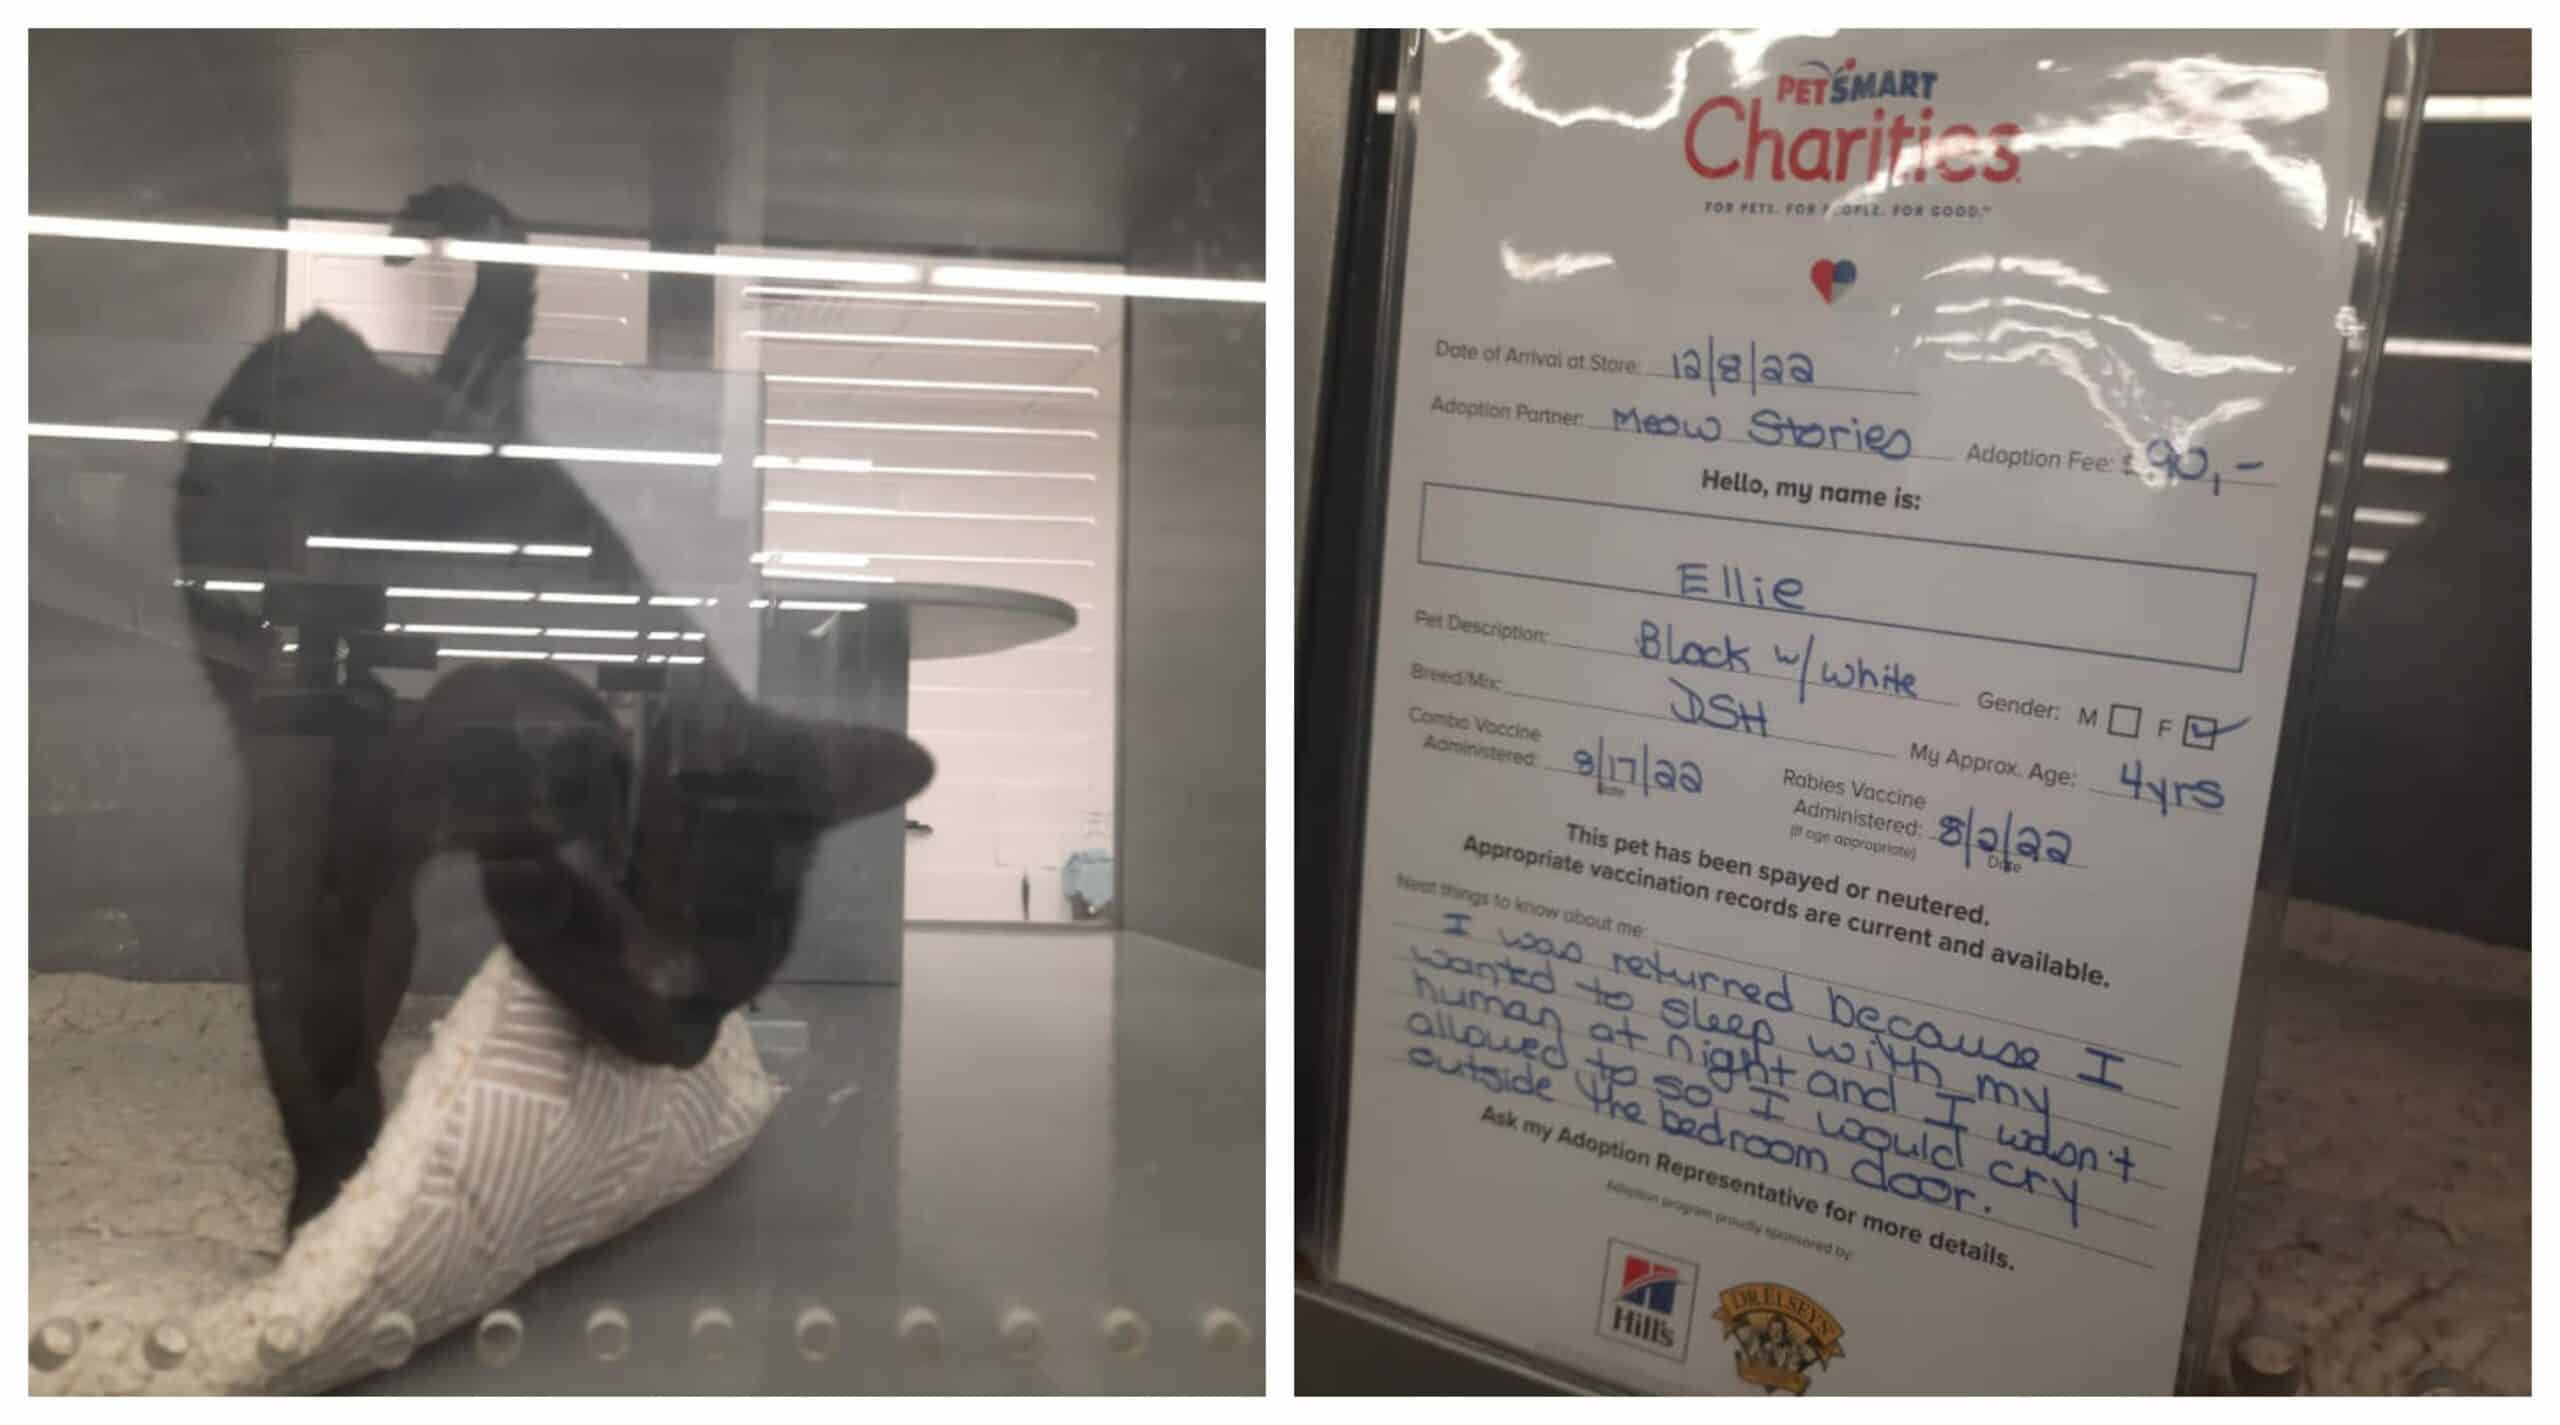 Because she wanted to cuddle her owners at night the poor cat was returned to the shelter